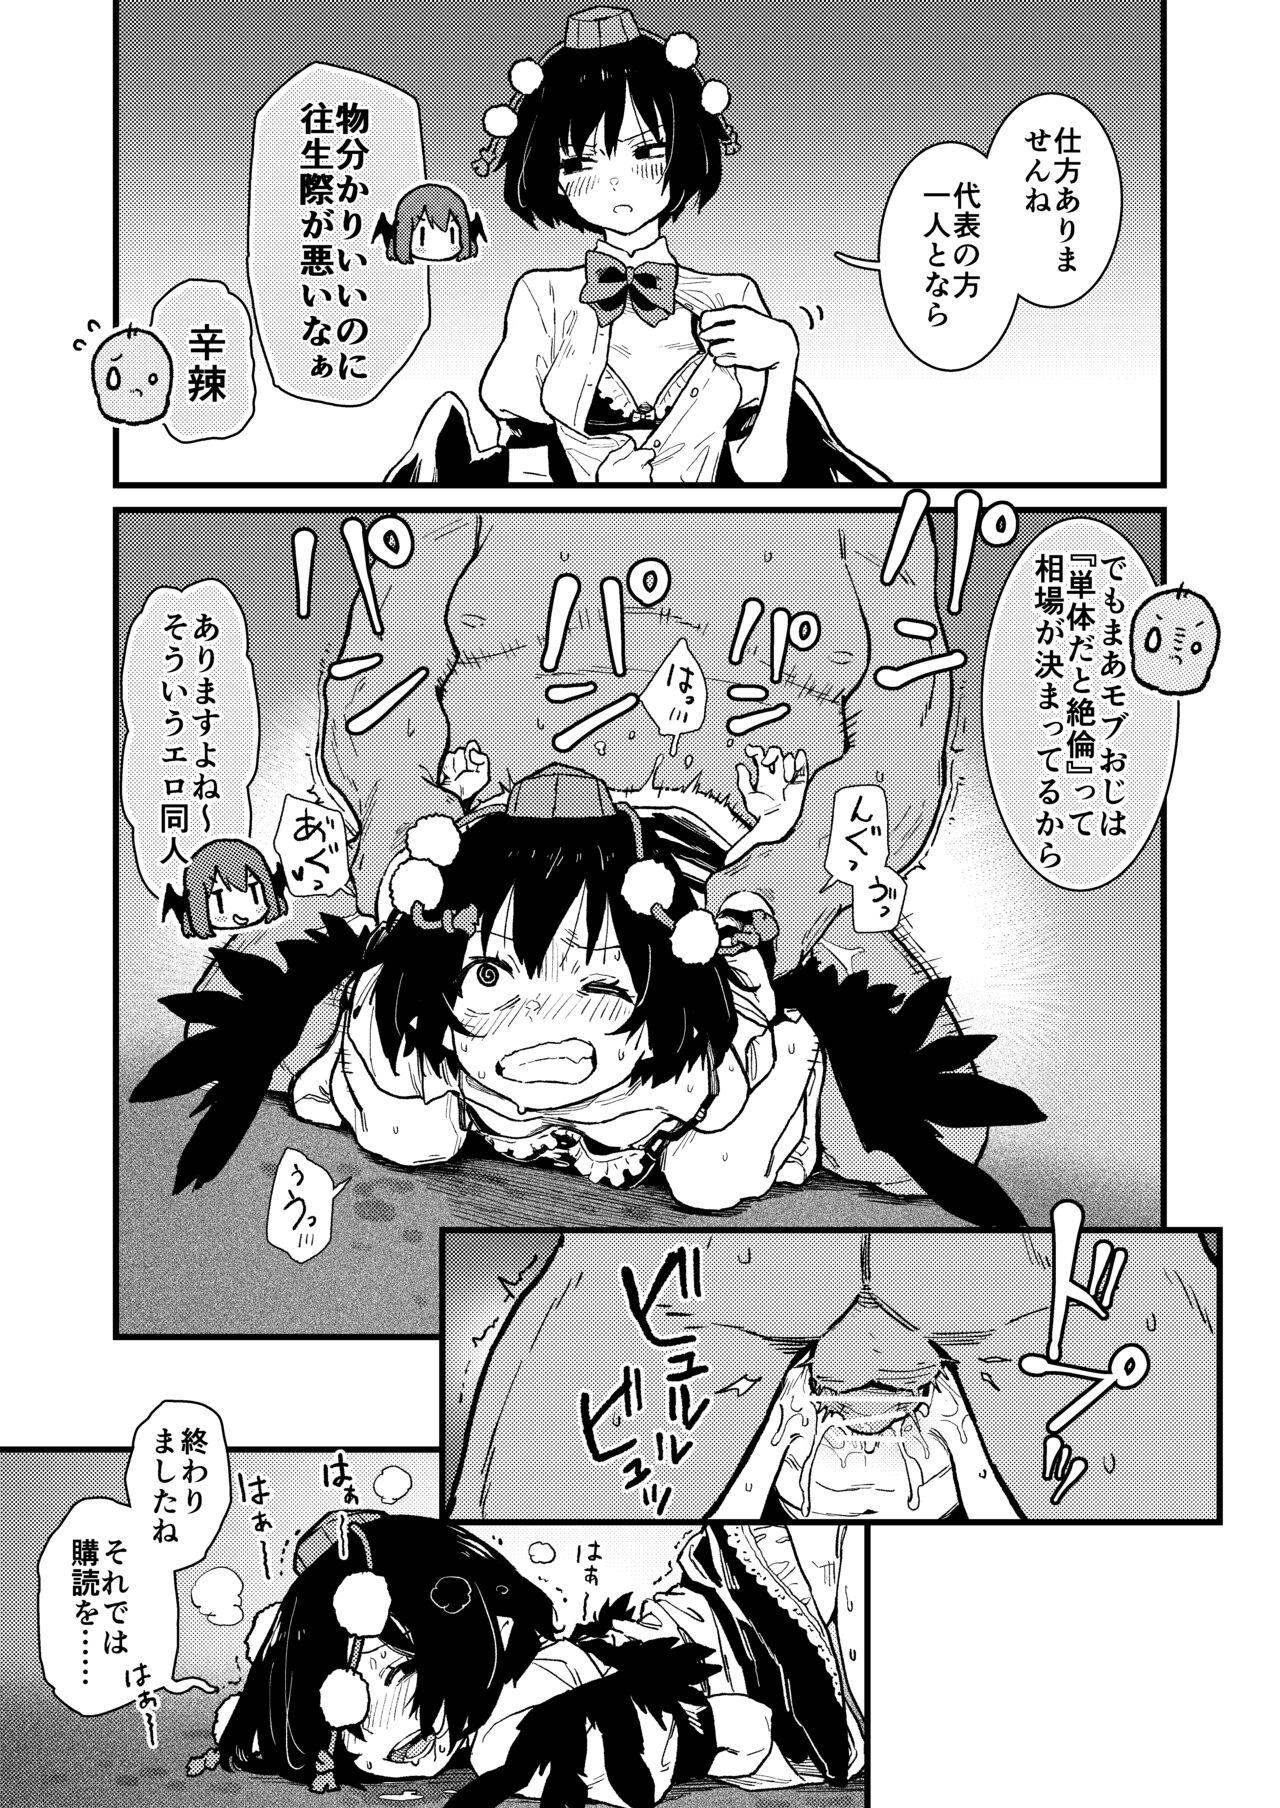 Lolicon Mob Oji ③ R18/Manga/6+omake 1p - Touhou project Cum On Tits - Picture 2